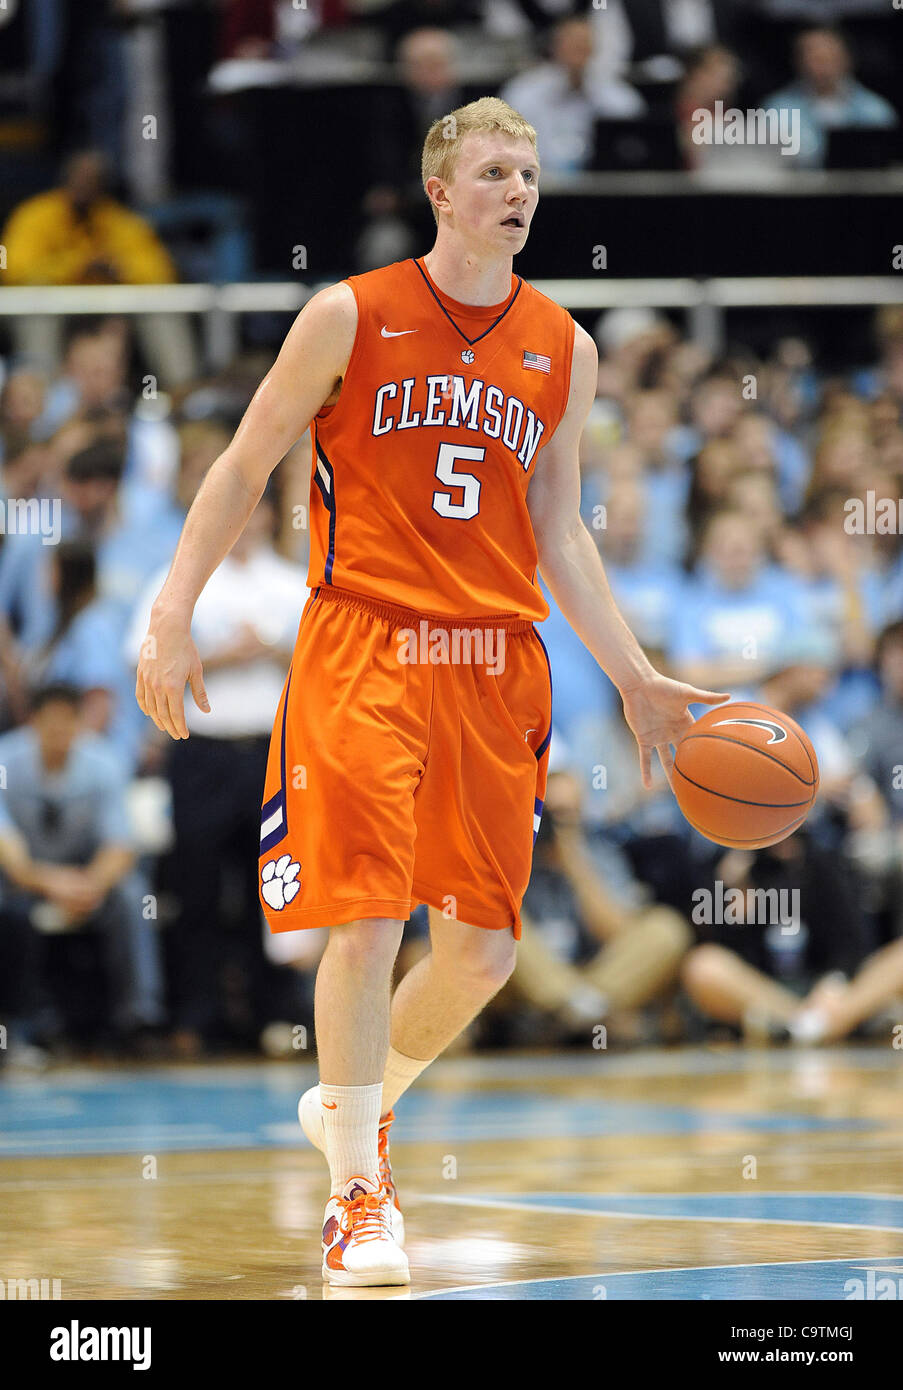 Feb. 18, 2012 - Chapel Hill, North Carolina; USA -  TANNER SMITH (5) of the Clemson Tigers as the University of North Carolina Tar Heels defeat the Clemson Tigers with a final score of 74-52 as they played mens college basketball at the Dean Smith Center located in Chapel Hill.  Copyright 2012 Jason Stock Photo